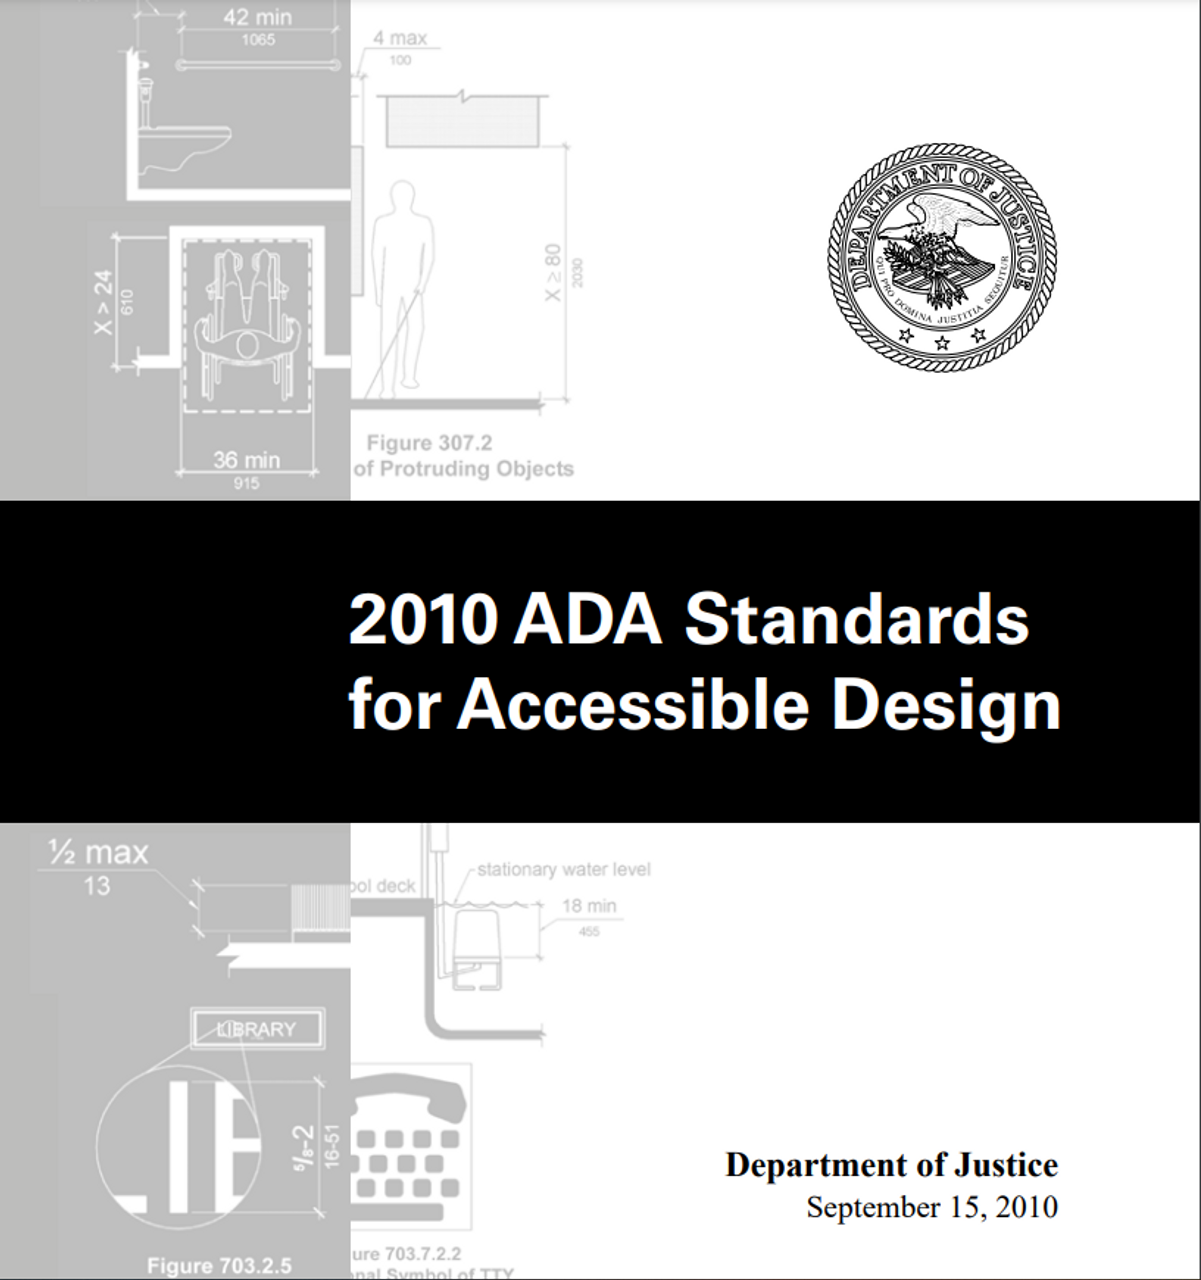 ADA 2010 Standards for Accessible Design